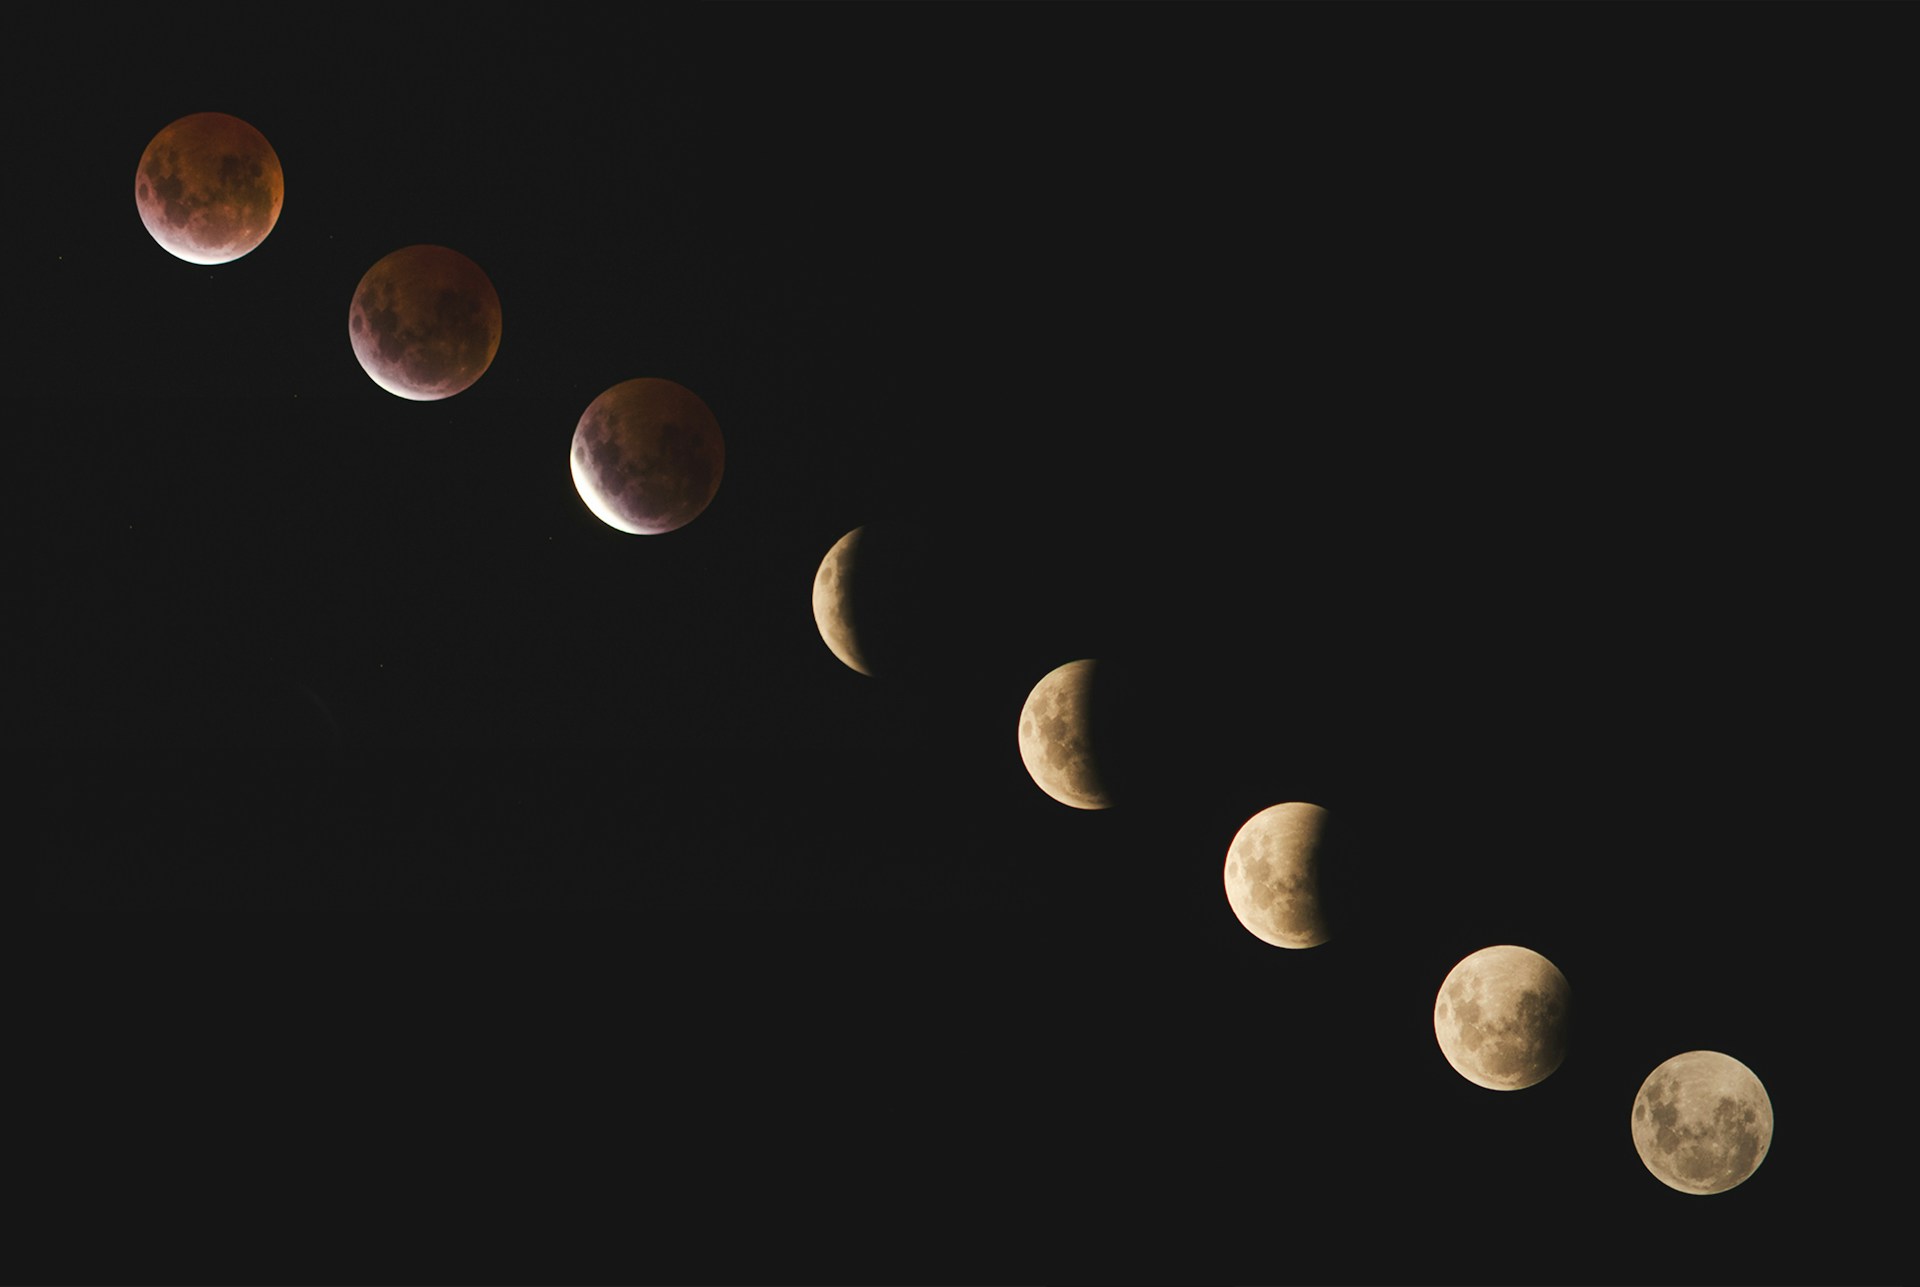 Phases After Full Moon Background Image 1920x1287